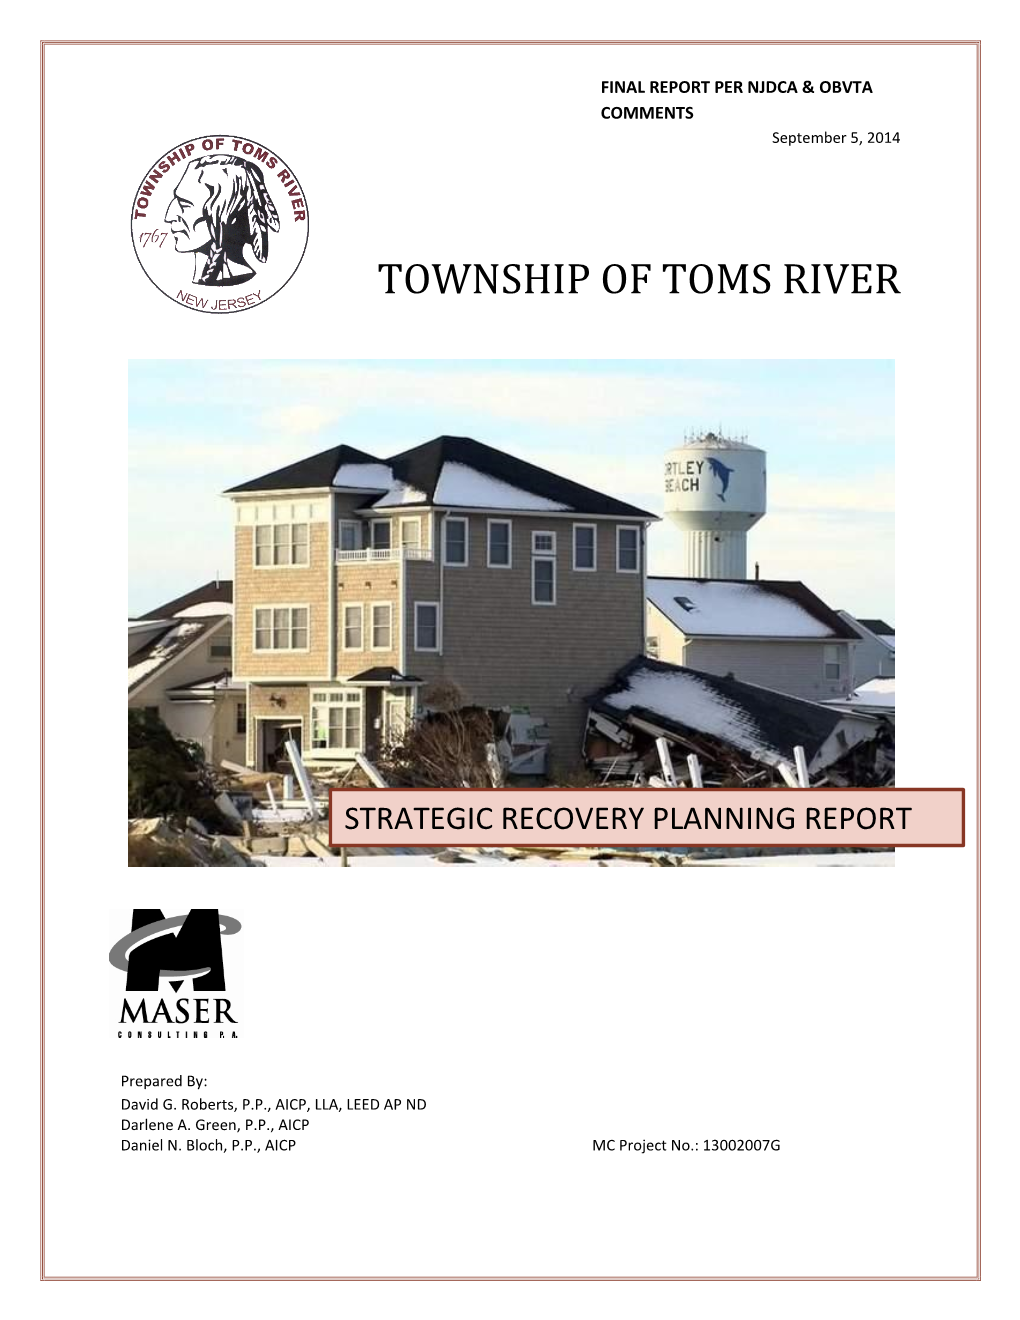 Township of Toms River